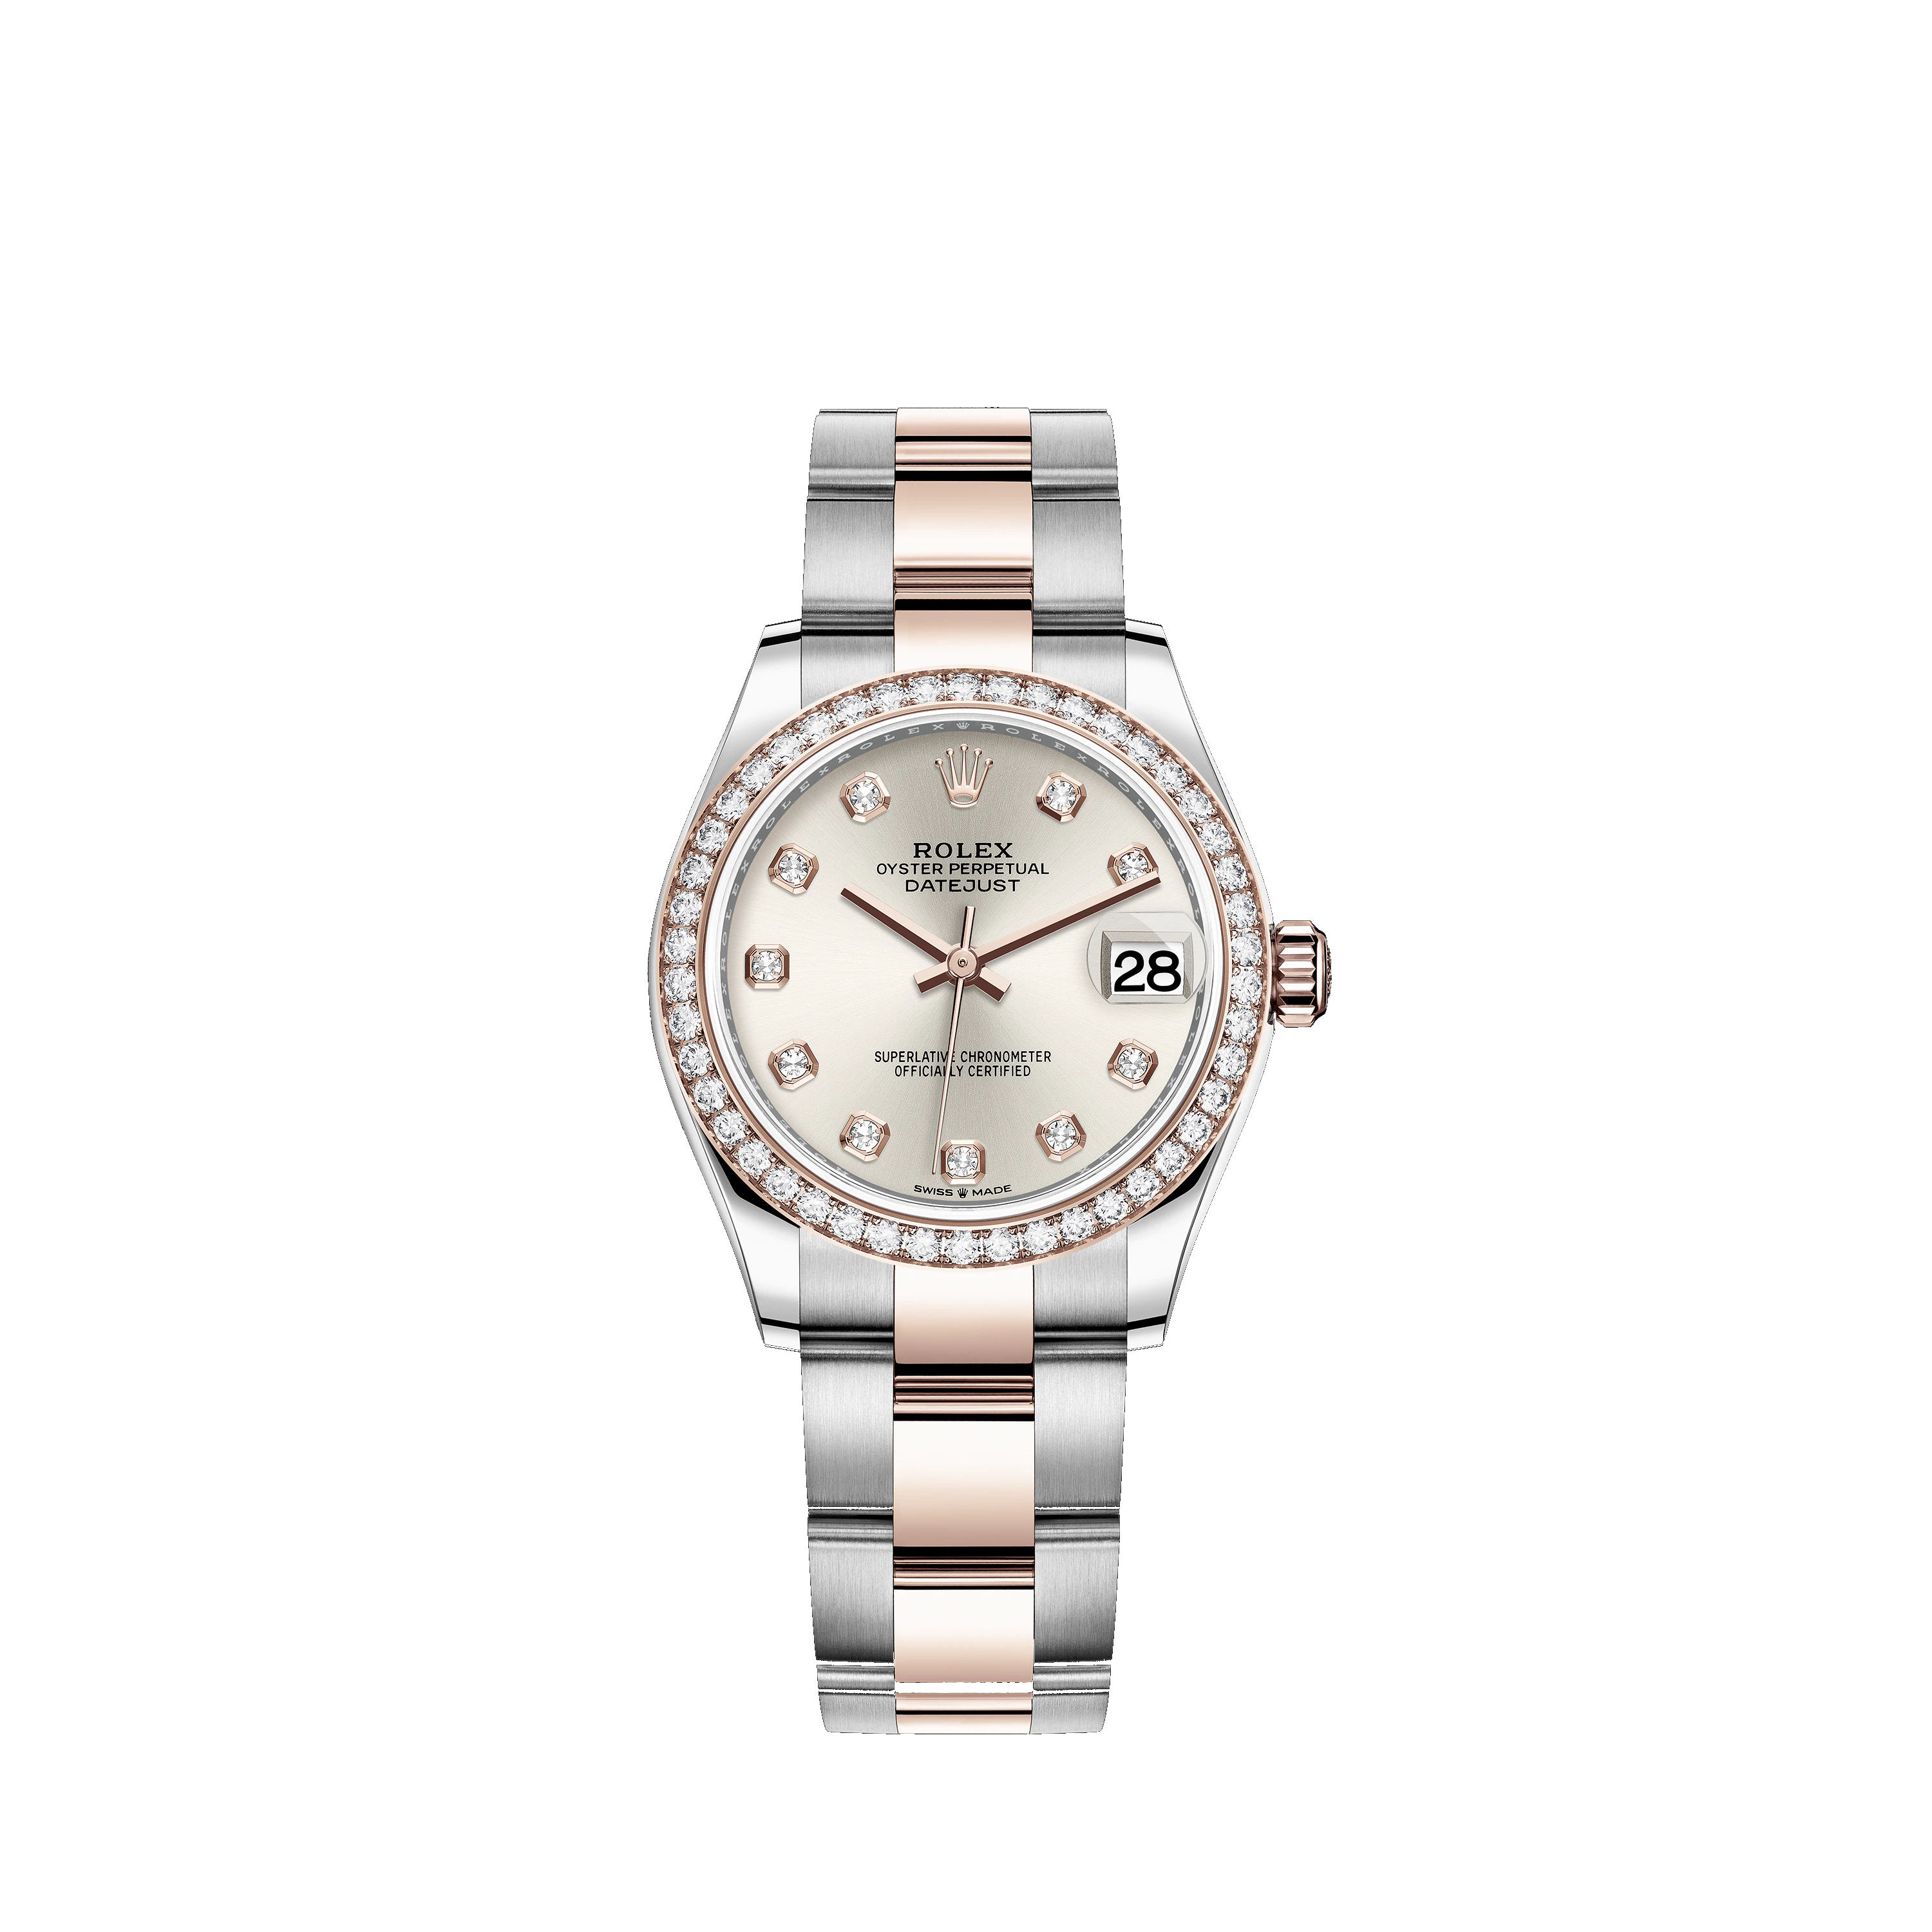 Datejust 31 278381RBR Rose Gold, Stainless Steel & Diamonds Watch (Silver Set with Diamonds)